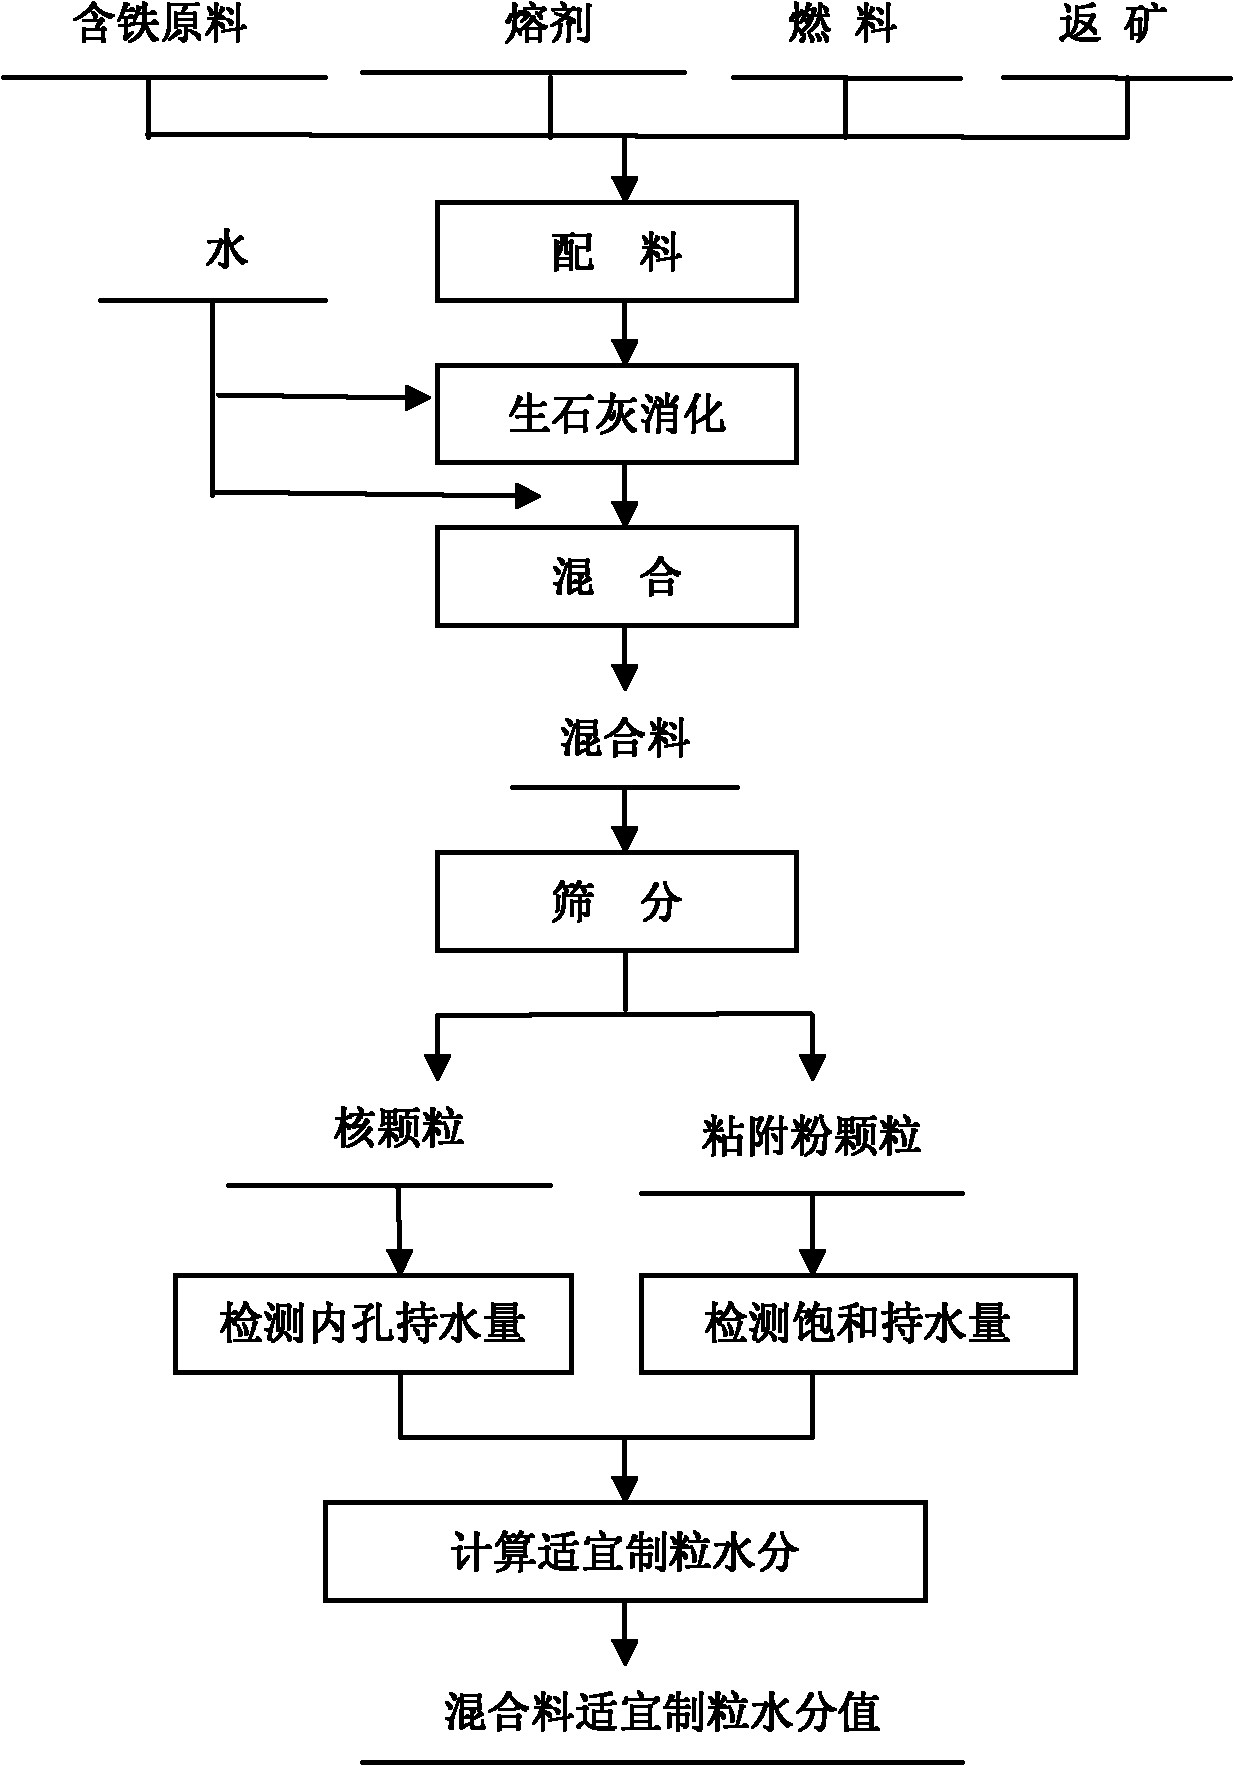 Method for quickly testing appropriate granulation moisture content of iron ore sinter mixture